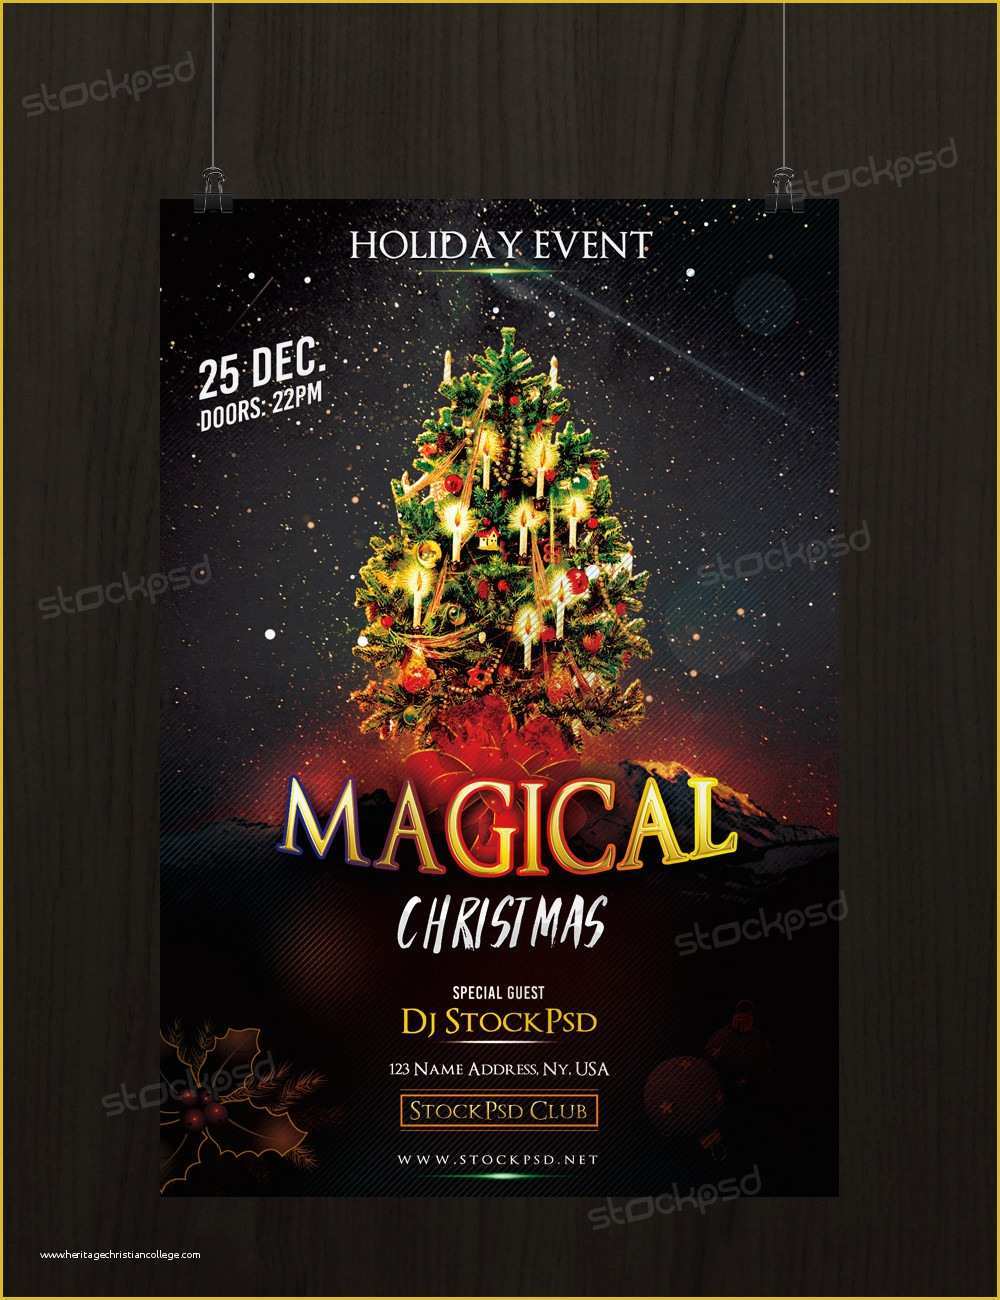 Free Christmas Flyer Templates Psd Of Download Magical Christmas Free Psd Flyer Template